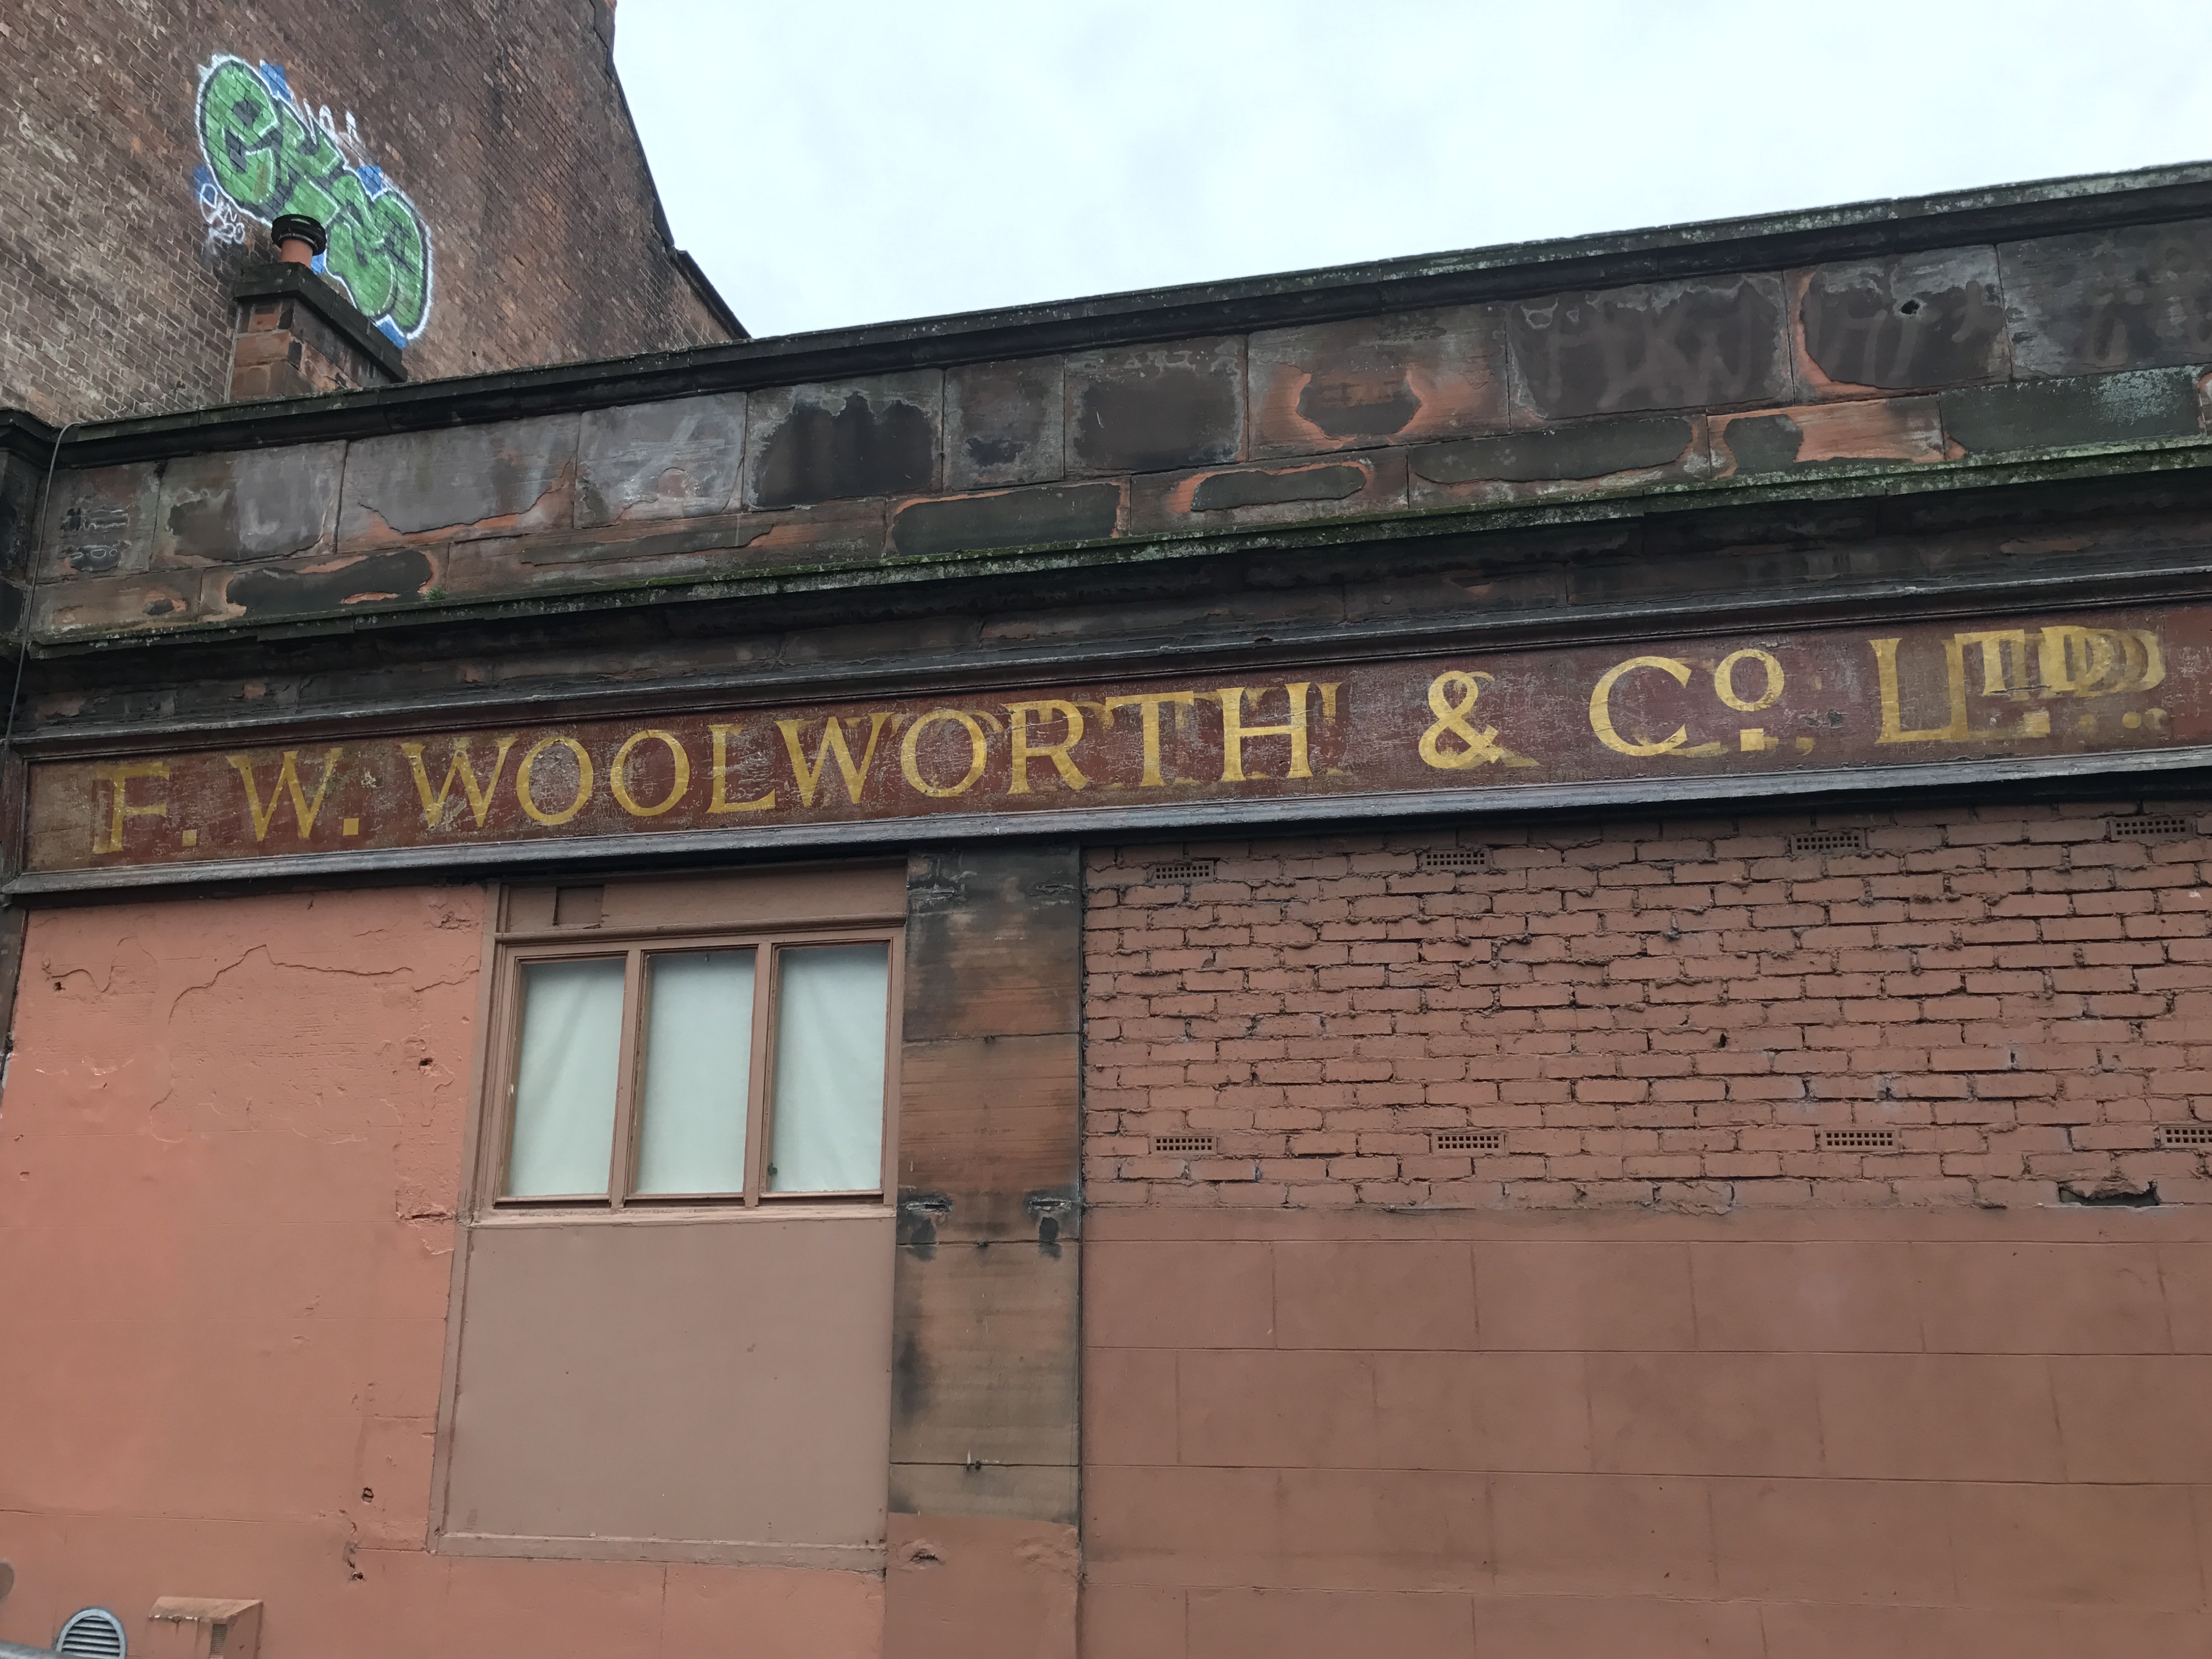 F.W.WOOLWORTH’S Sign.